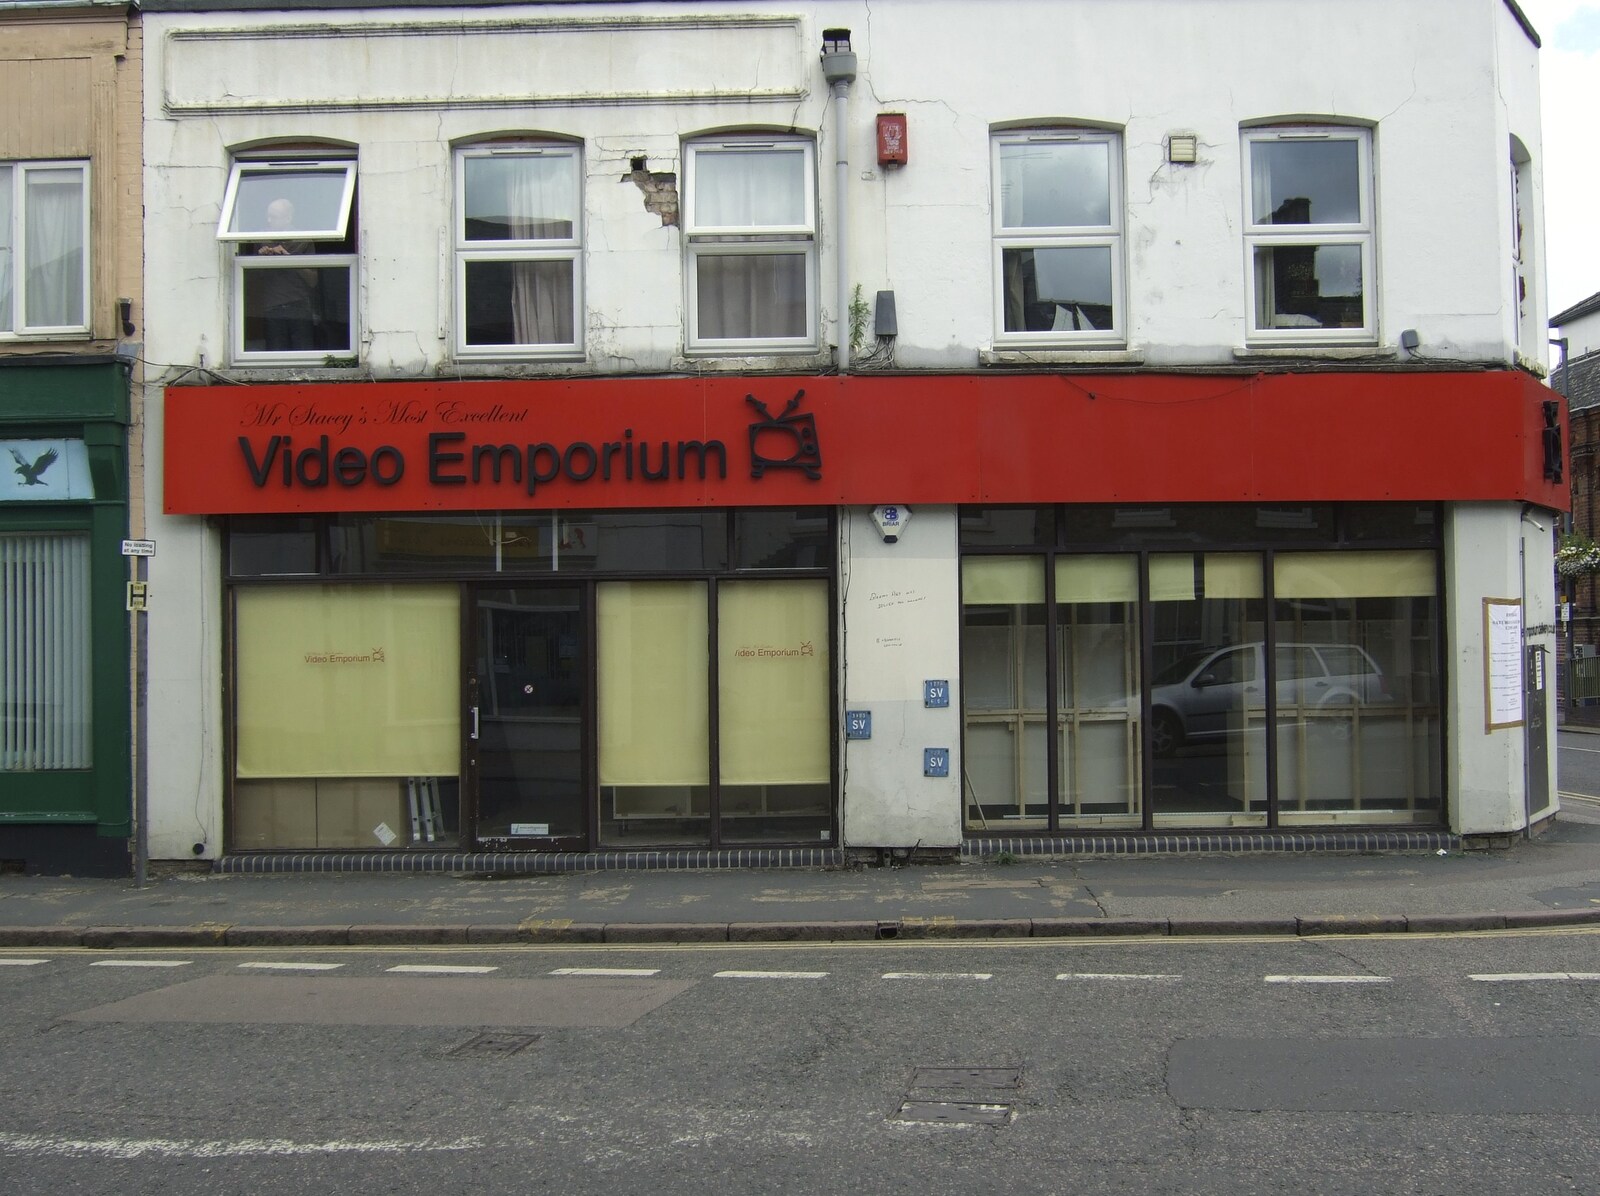 Sadly, further down Mill Road, the Video Emporium has finally given up from The Cambridge Folk Festival, Cherry Hinton Hall, Cambridge - 1st August 2009